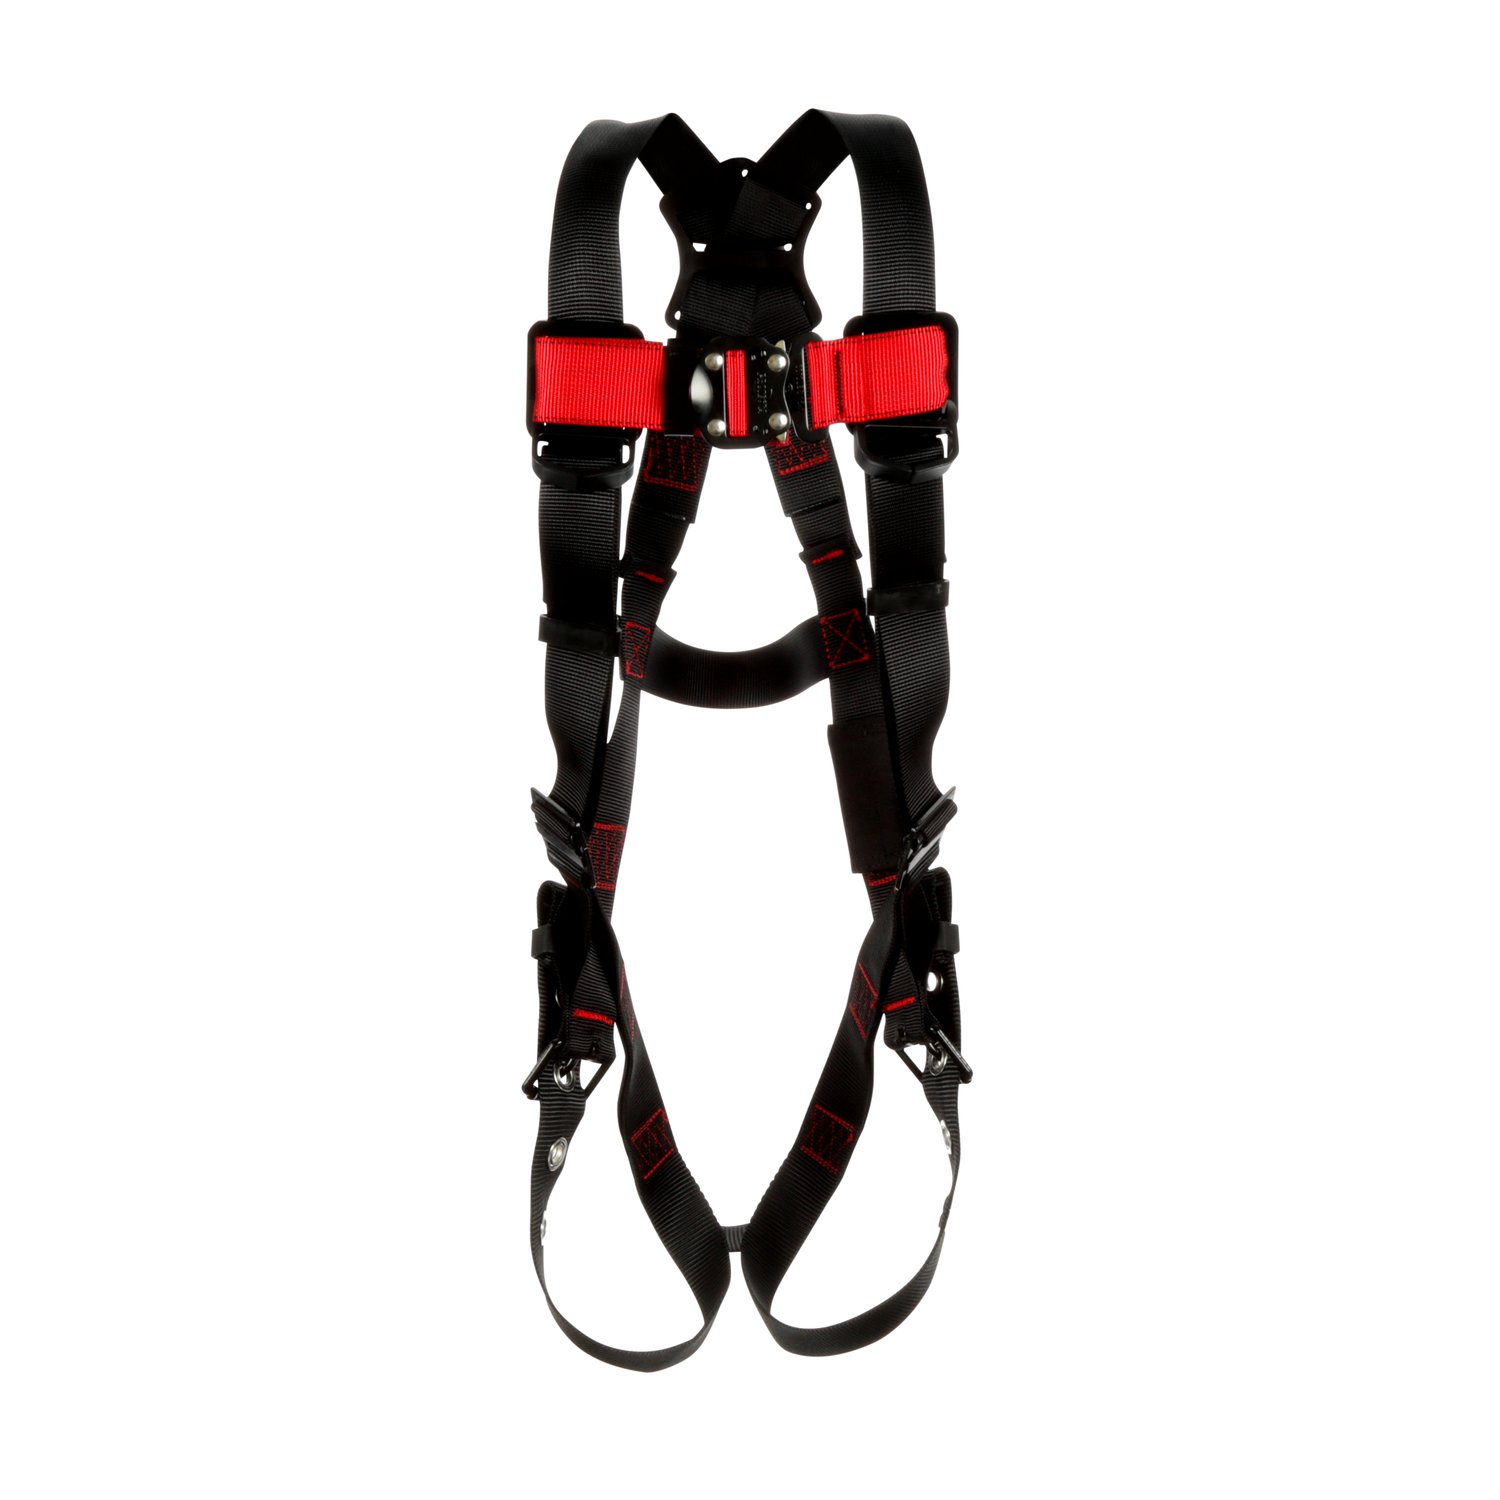 7100184600 - 3M Protecta P200 Vest Safety Harness 1161504, 2X